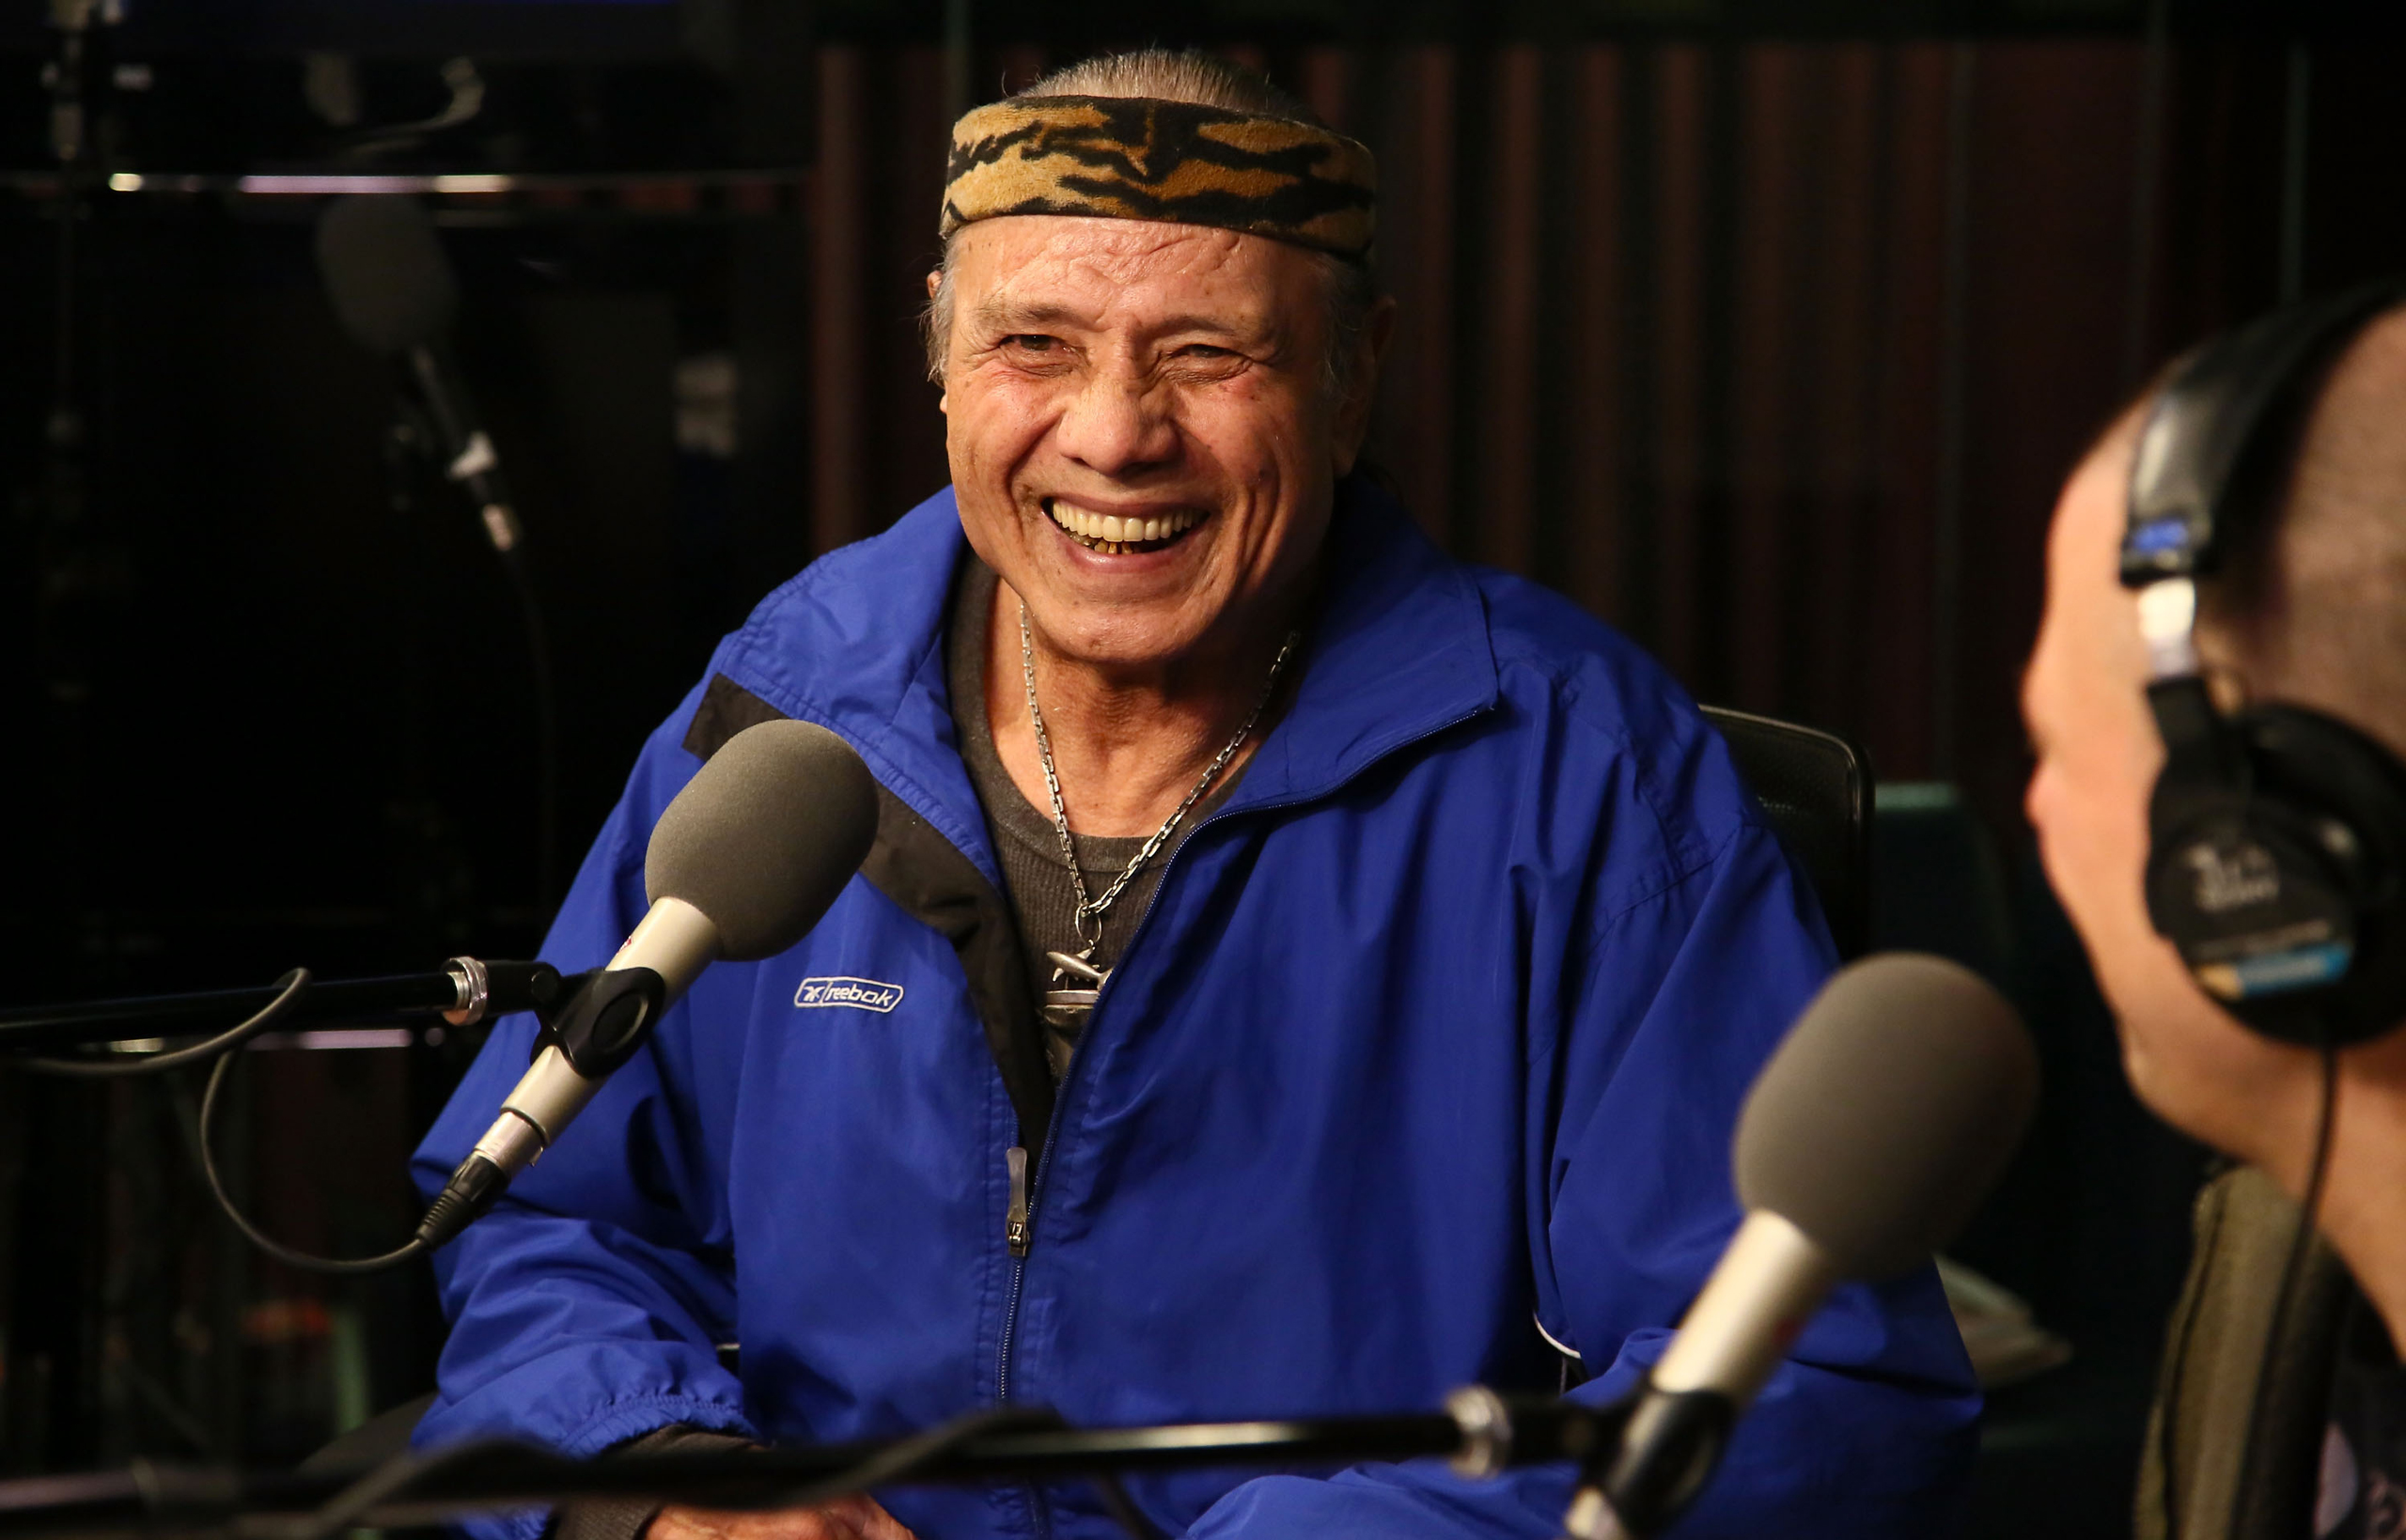 Jimmy "Superfly" Snuka visits "The Opie &amp; Anthony Show" at SiriusXM studios in New York City on Jan. 9, 2013. (Astrid Stawiarz—Getty Images)